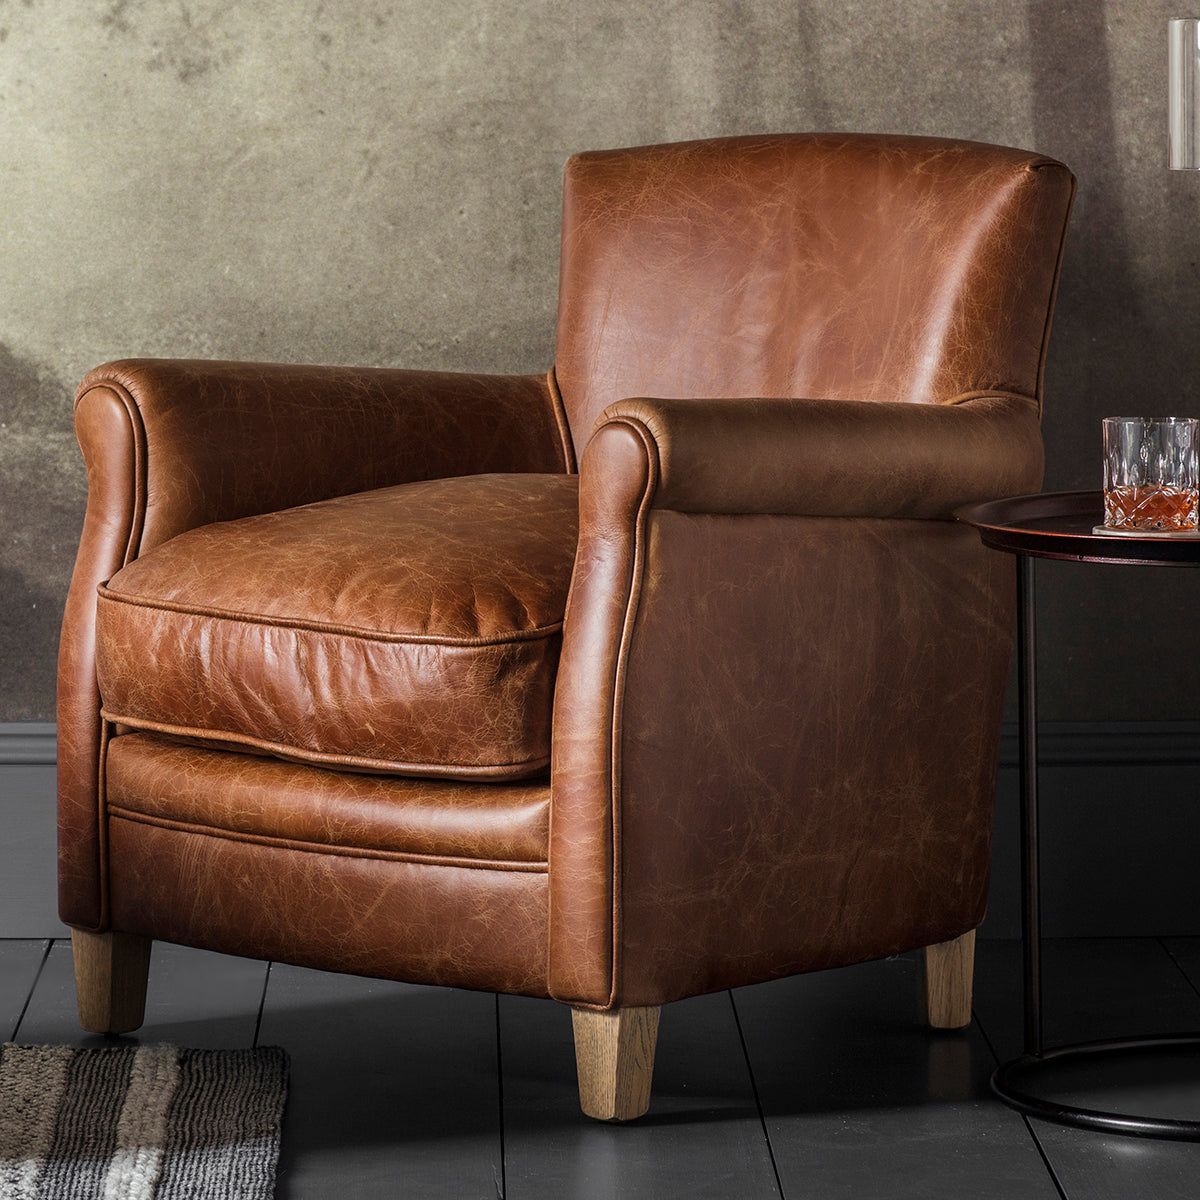 A vintage brown leather club chair for home furniture and interior decor from Kikiathome.co.uk.